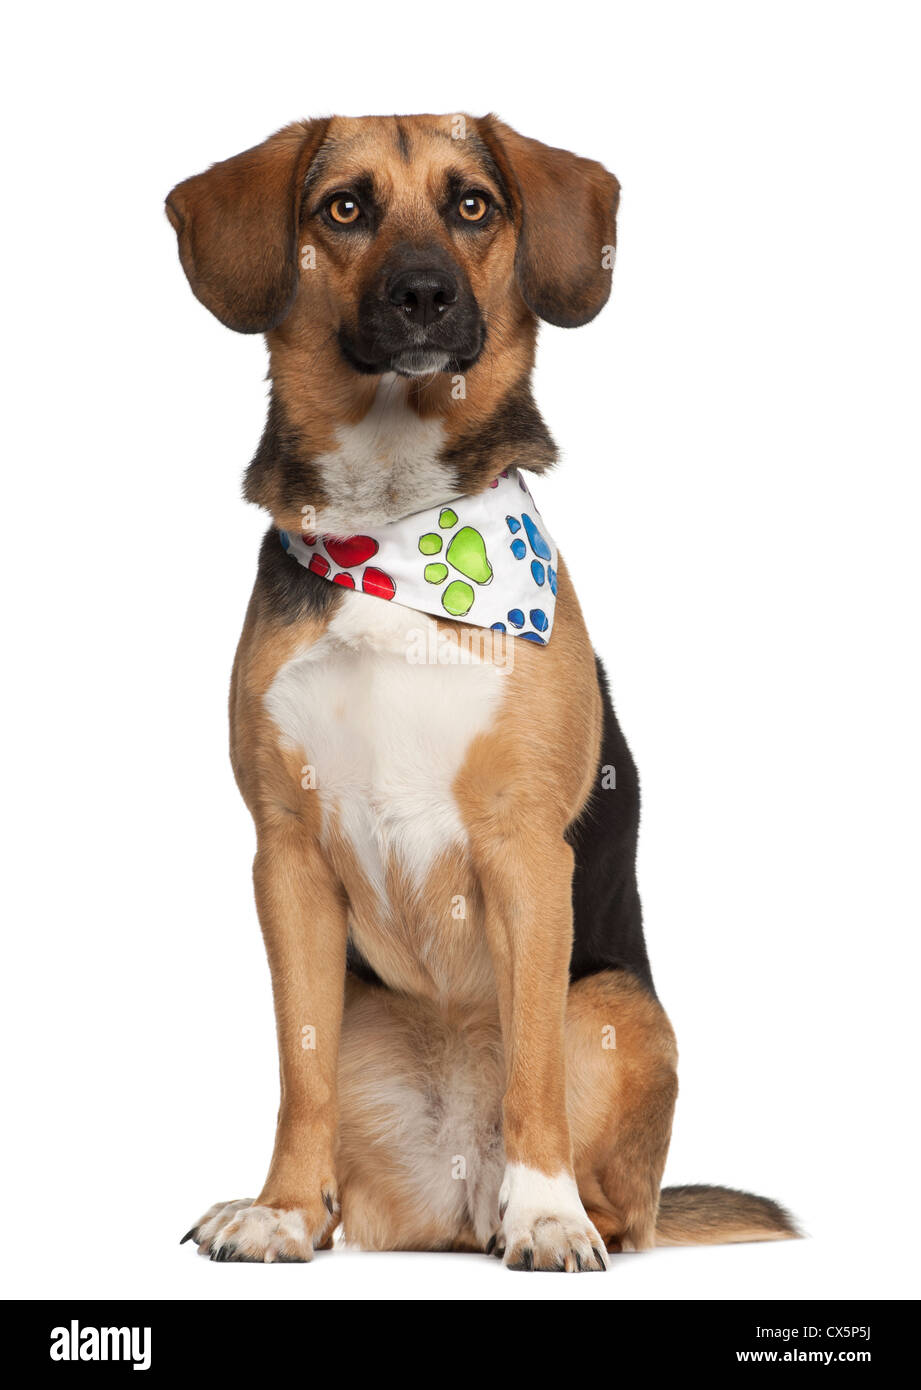 Dog cross bred with beagle, 2 years old, wearing neckerchief against white background Stock Photo